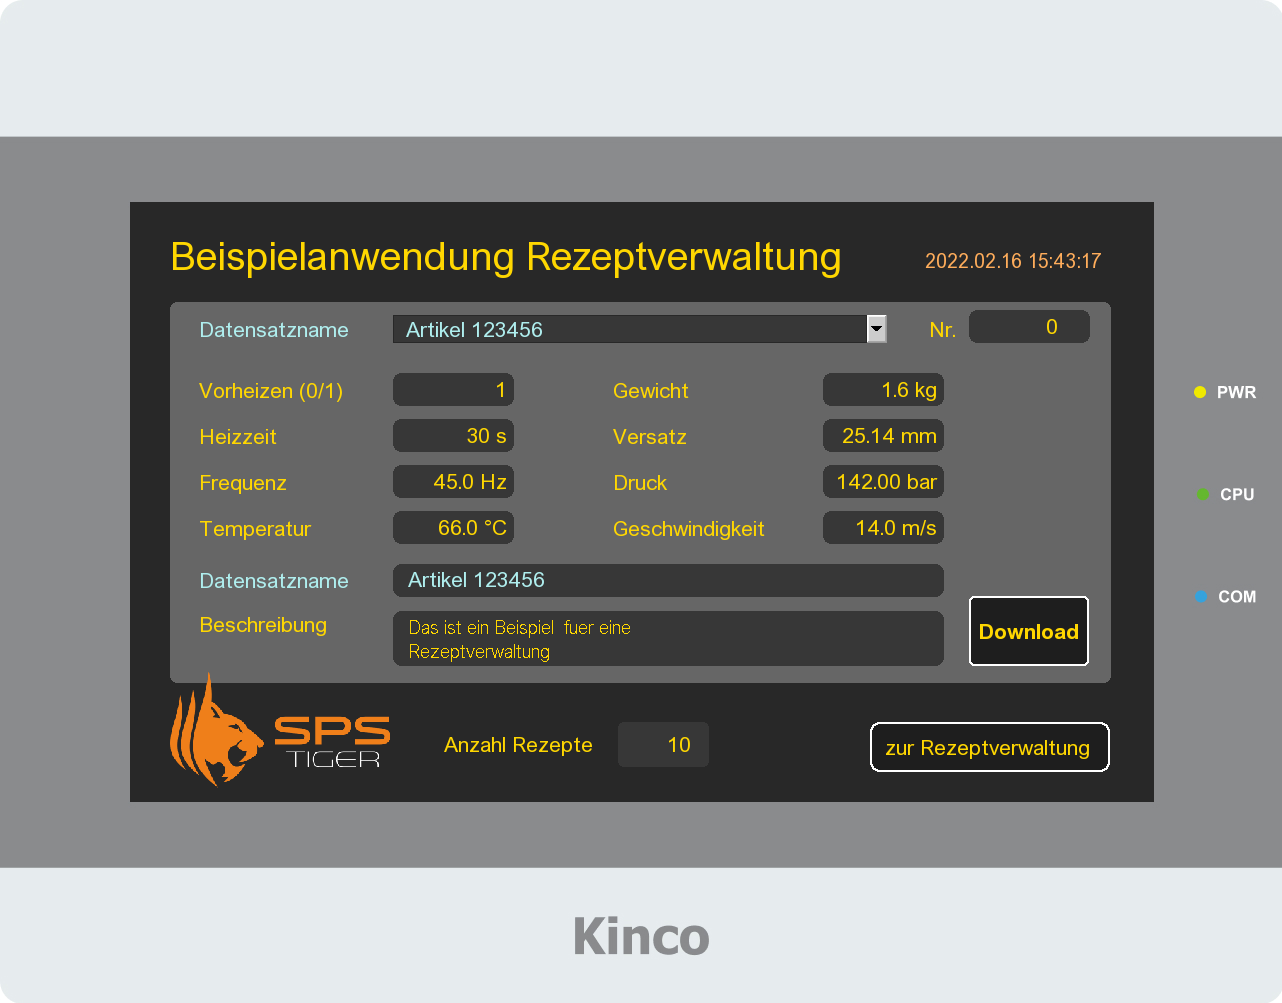 Example program for a simple recipe selection and recipe management for Kinco HMI